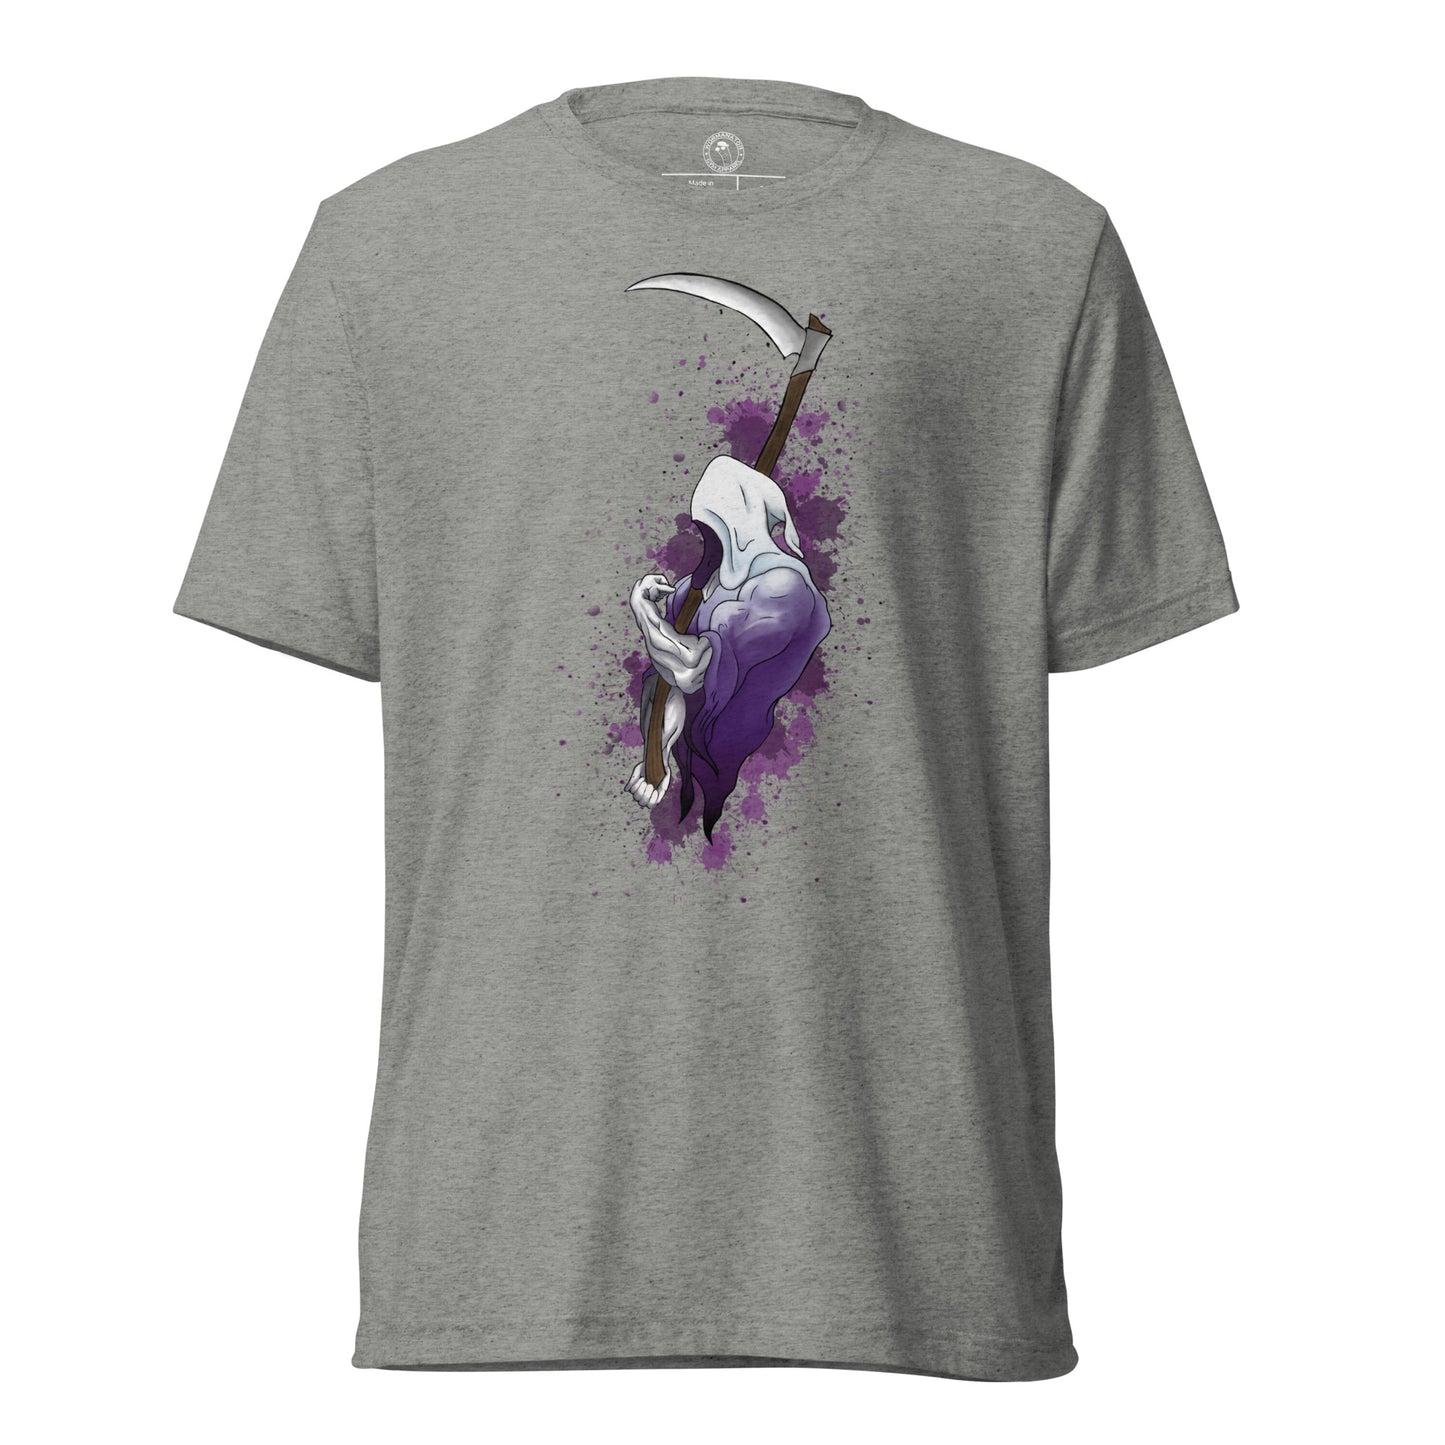 Grip Reaper Shirt in Athletic Grey Triblend